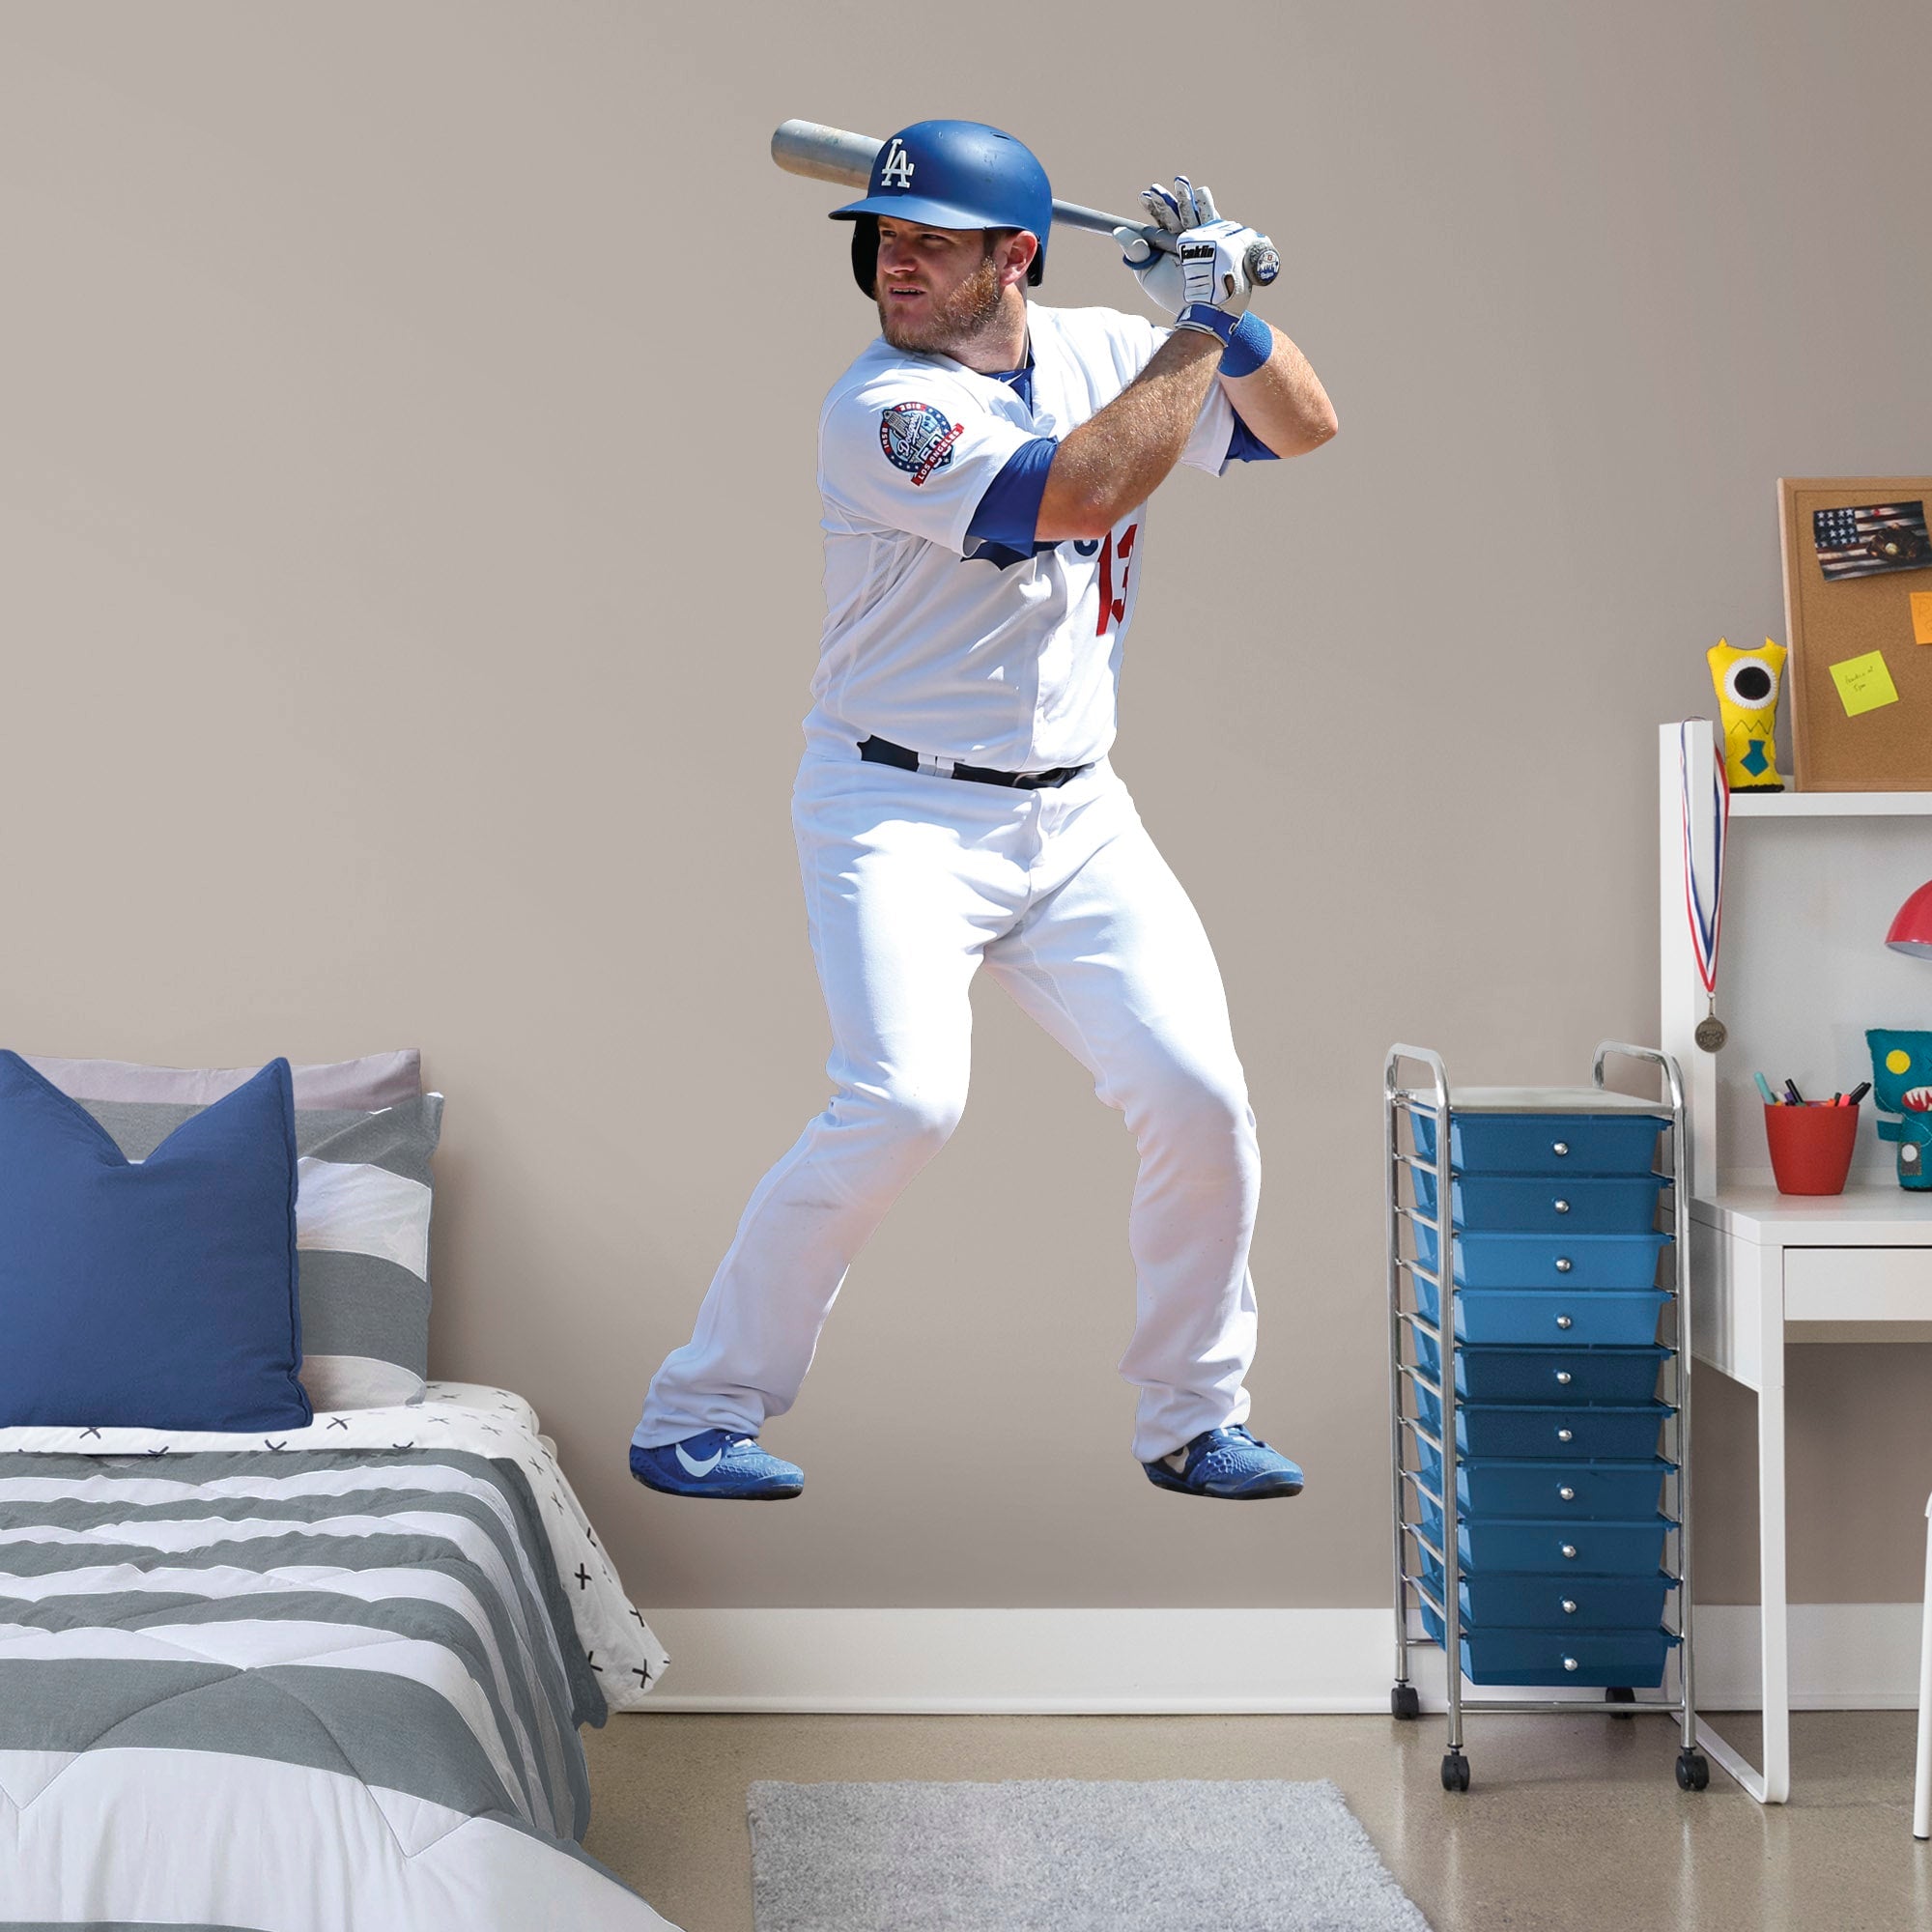 Max Muncy for Los Angeles Dodgers - Officially Licensed MLB Removable Wall Decal Life-Size Athlete + 2 Decals (51"W x 77"H) by F